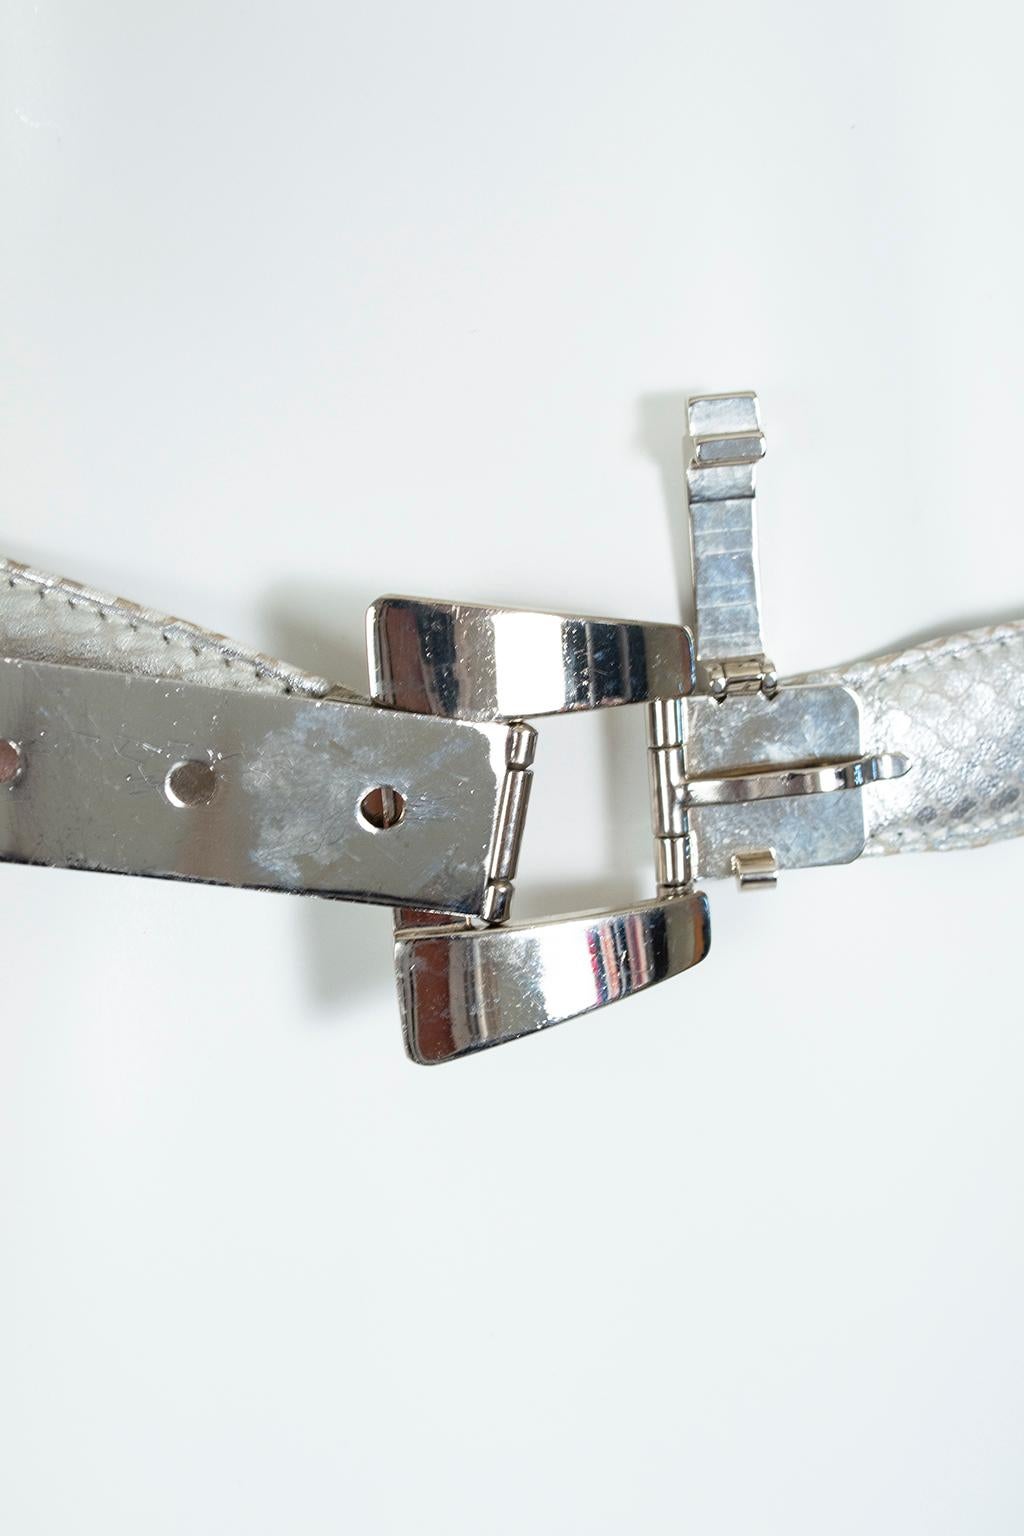 Women's Escada Silver Snakeskin Belt with Modernist Chrome Buckle and Tail –Small, 1980s For Sale